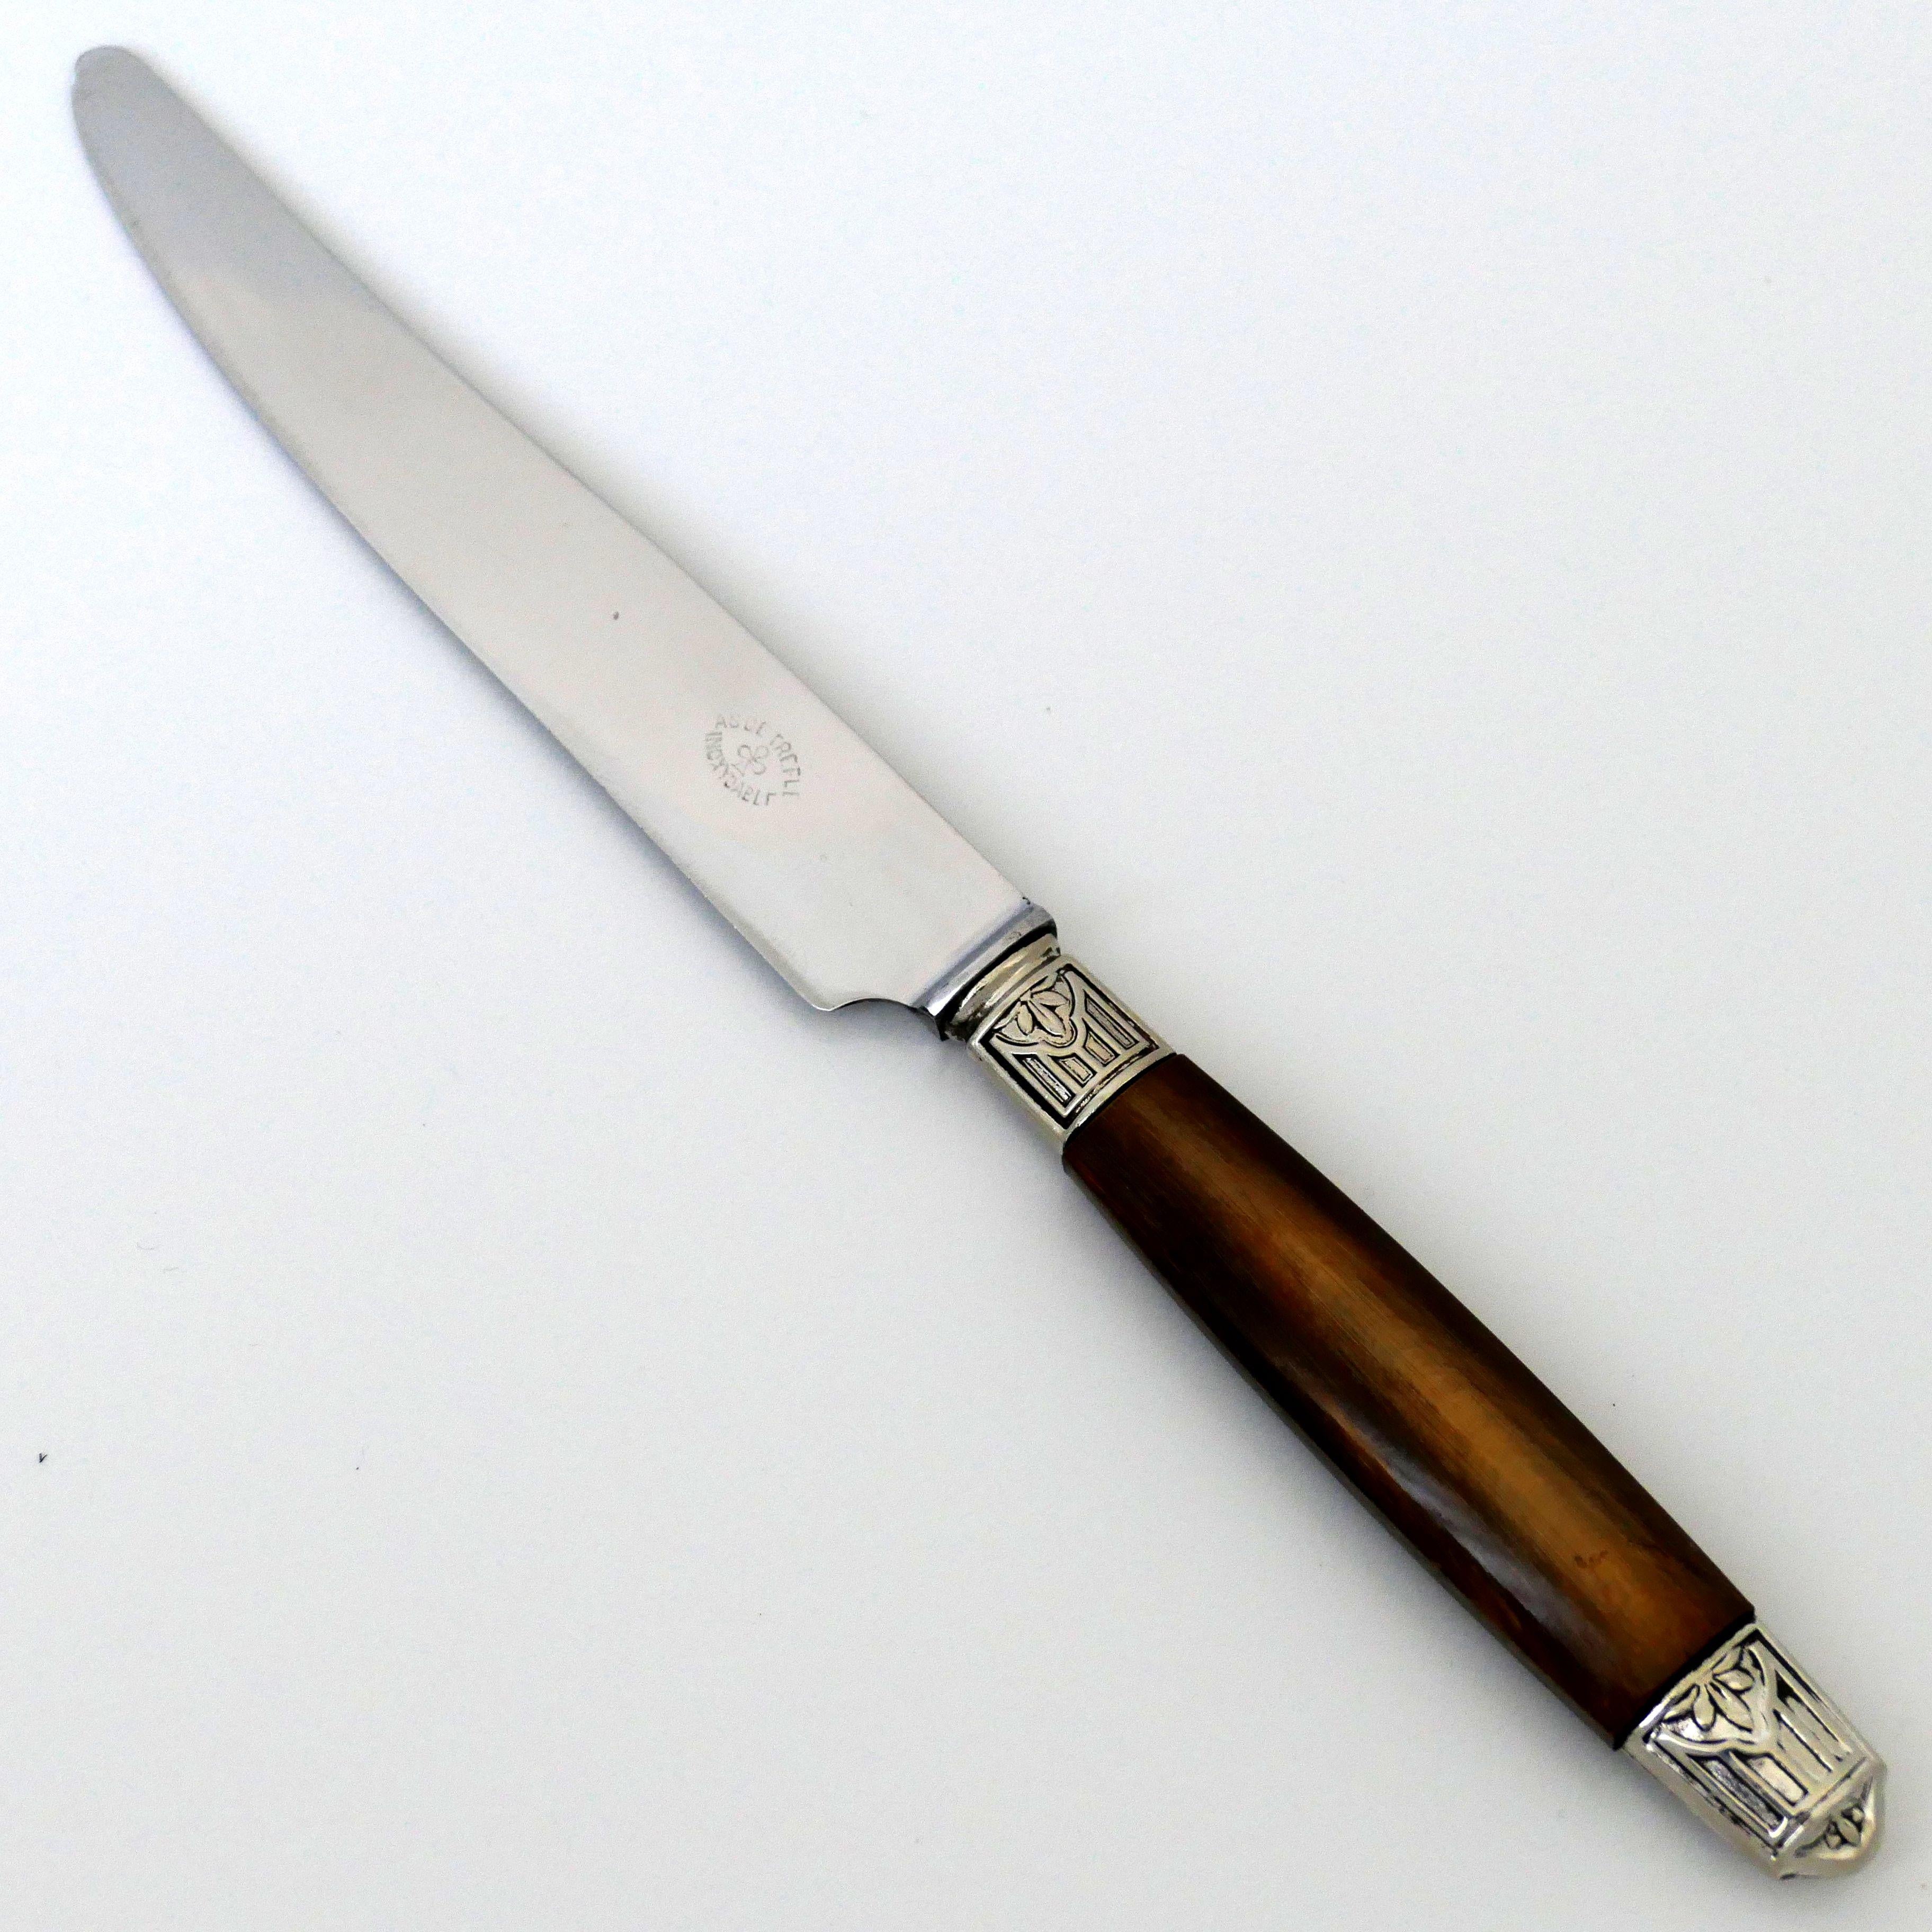 This service includes twelve dinner knives with Art Deco decoration. Horn handles, silver ferrules and collars. The stainless steel blades bear the mark 